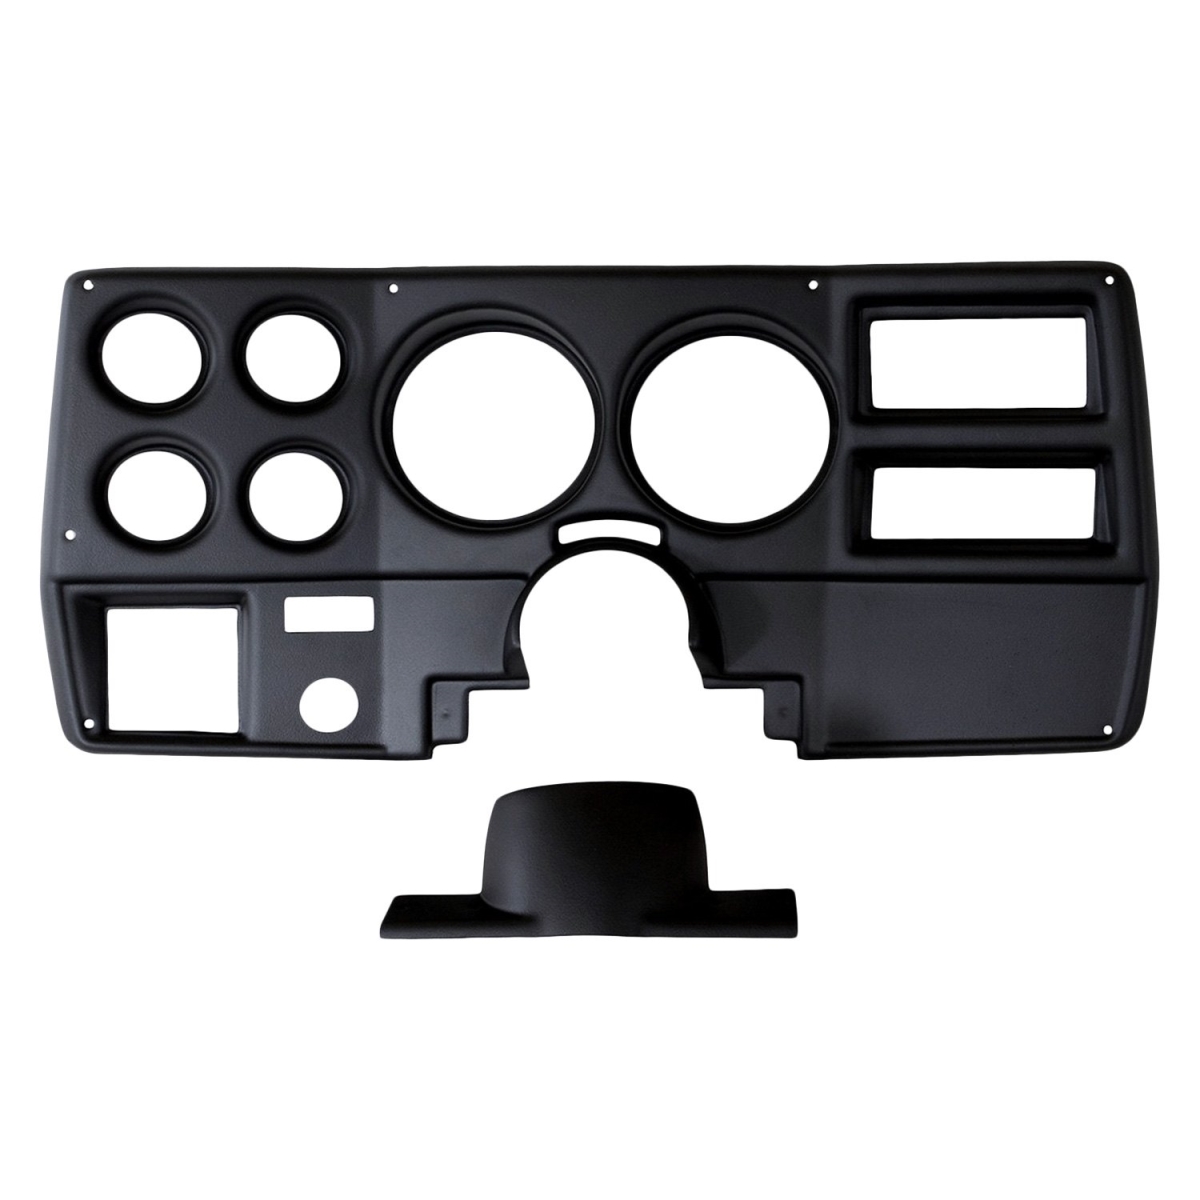 Picture of Auto Meter 2137 Direct Fit Dash Panel Gauge Mount